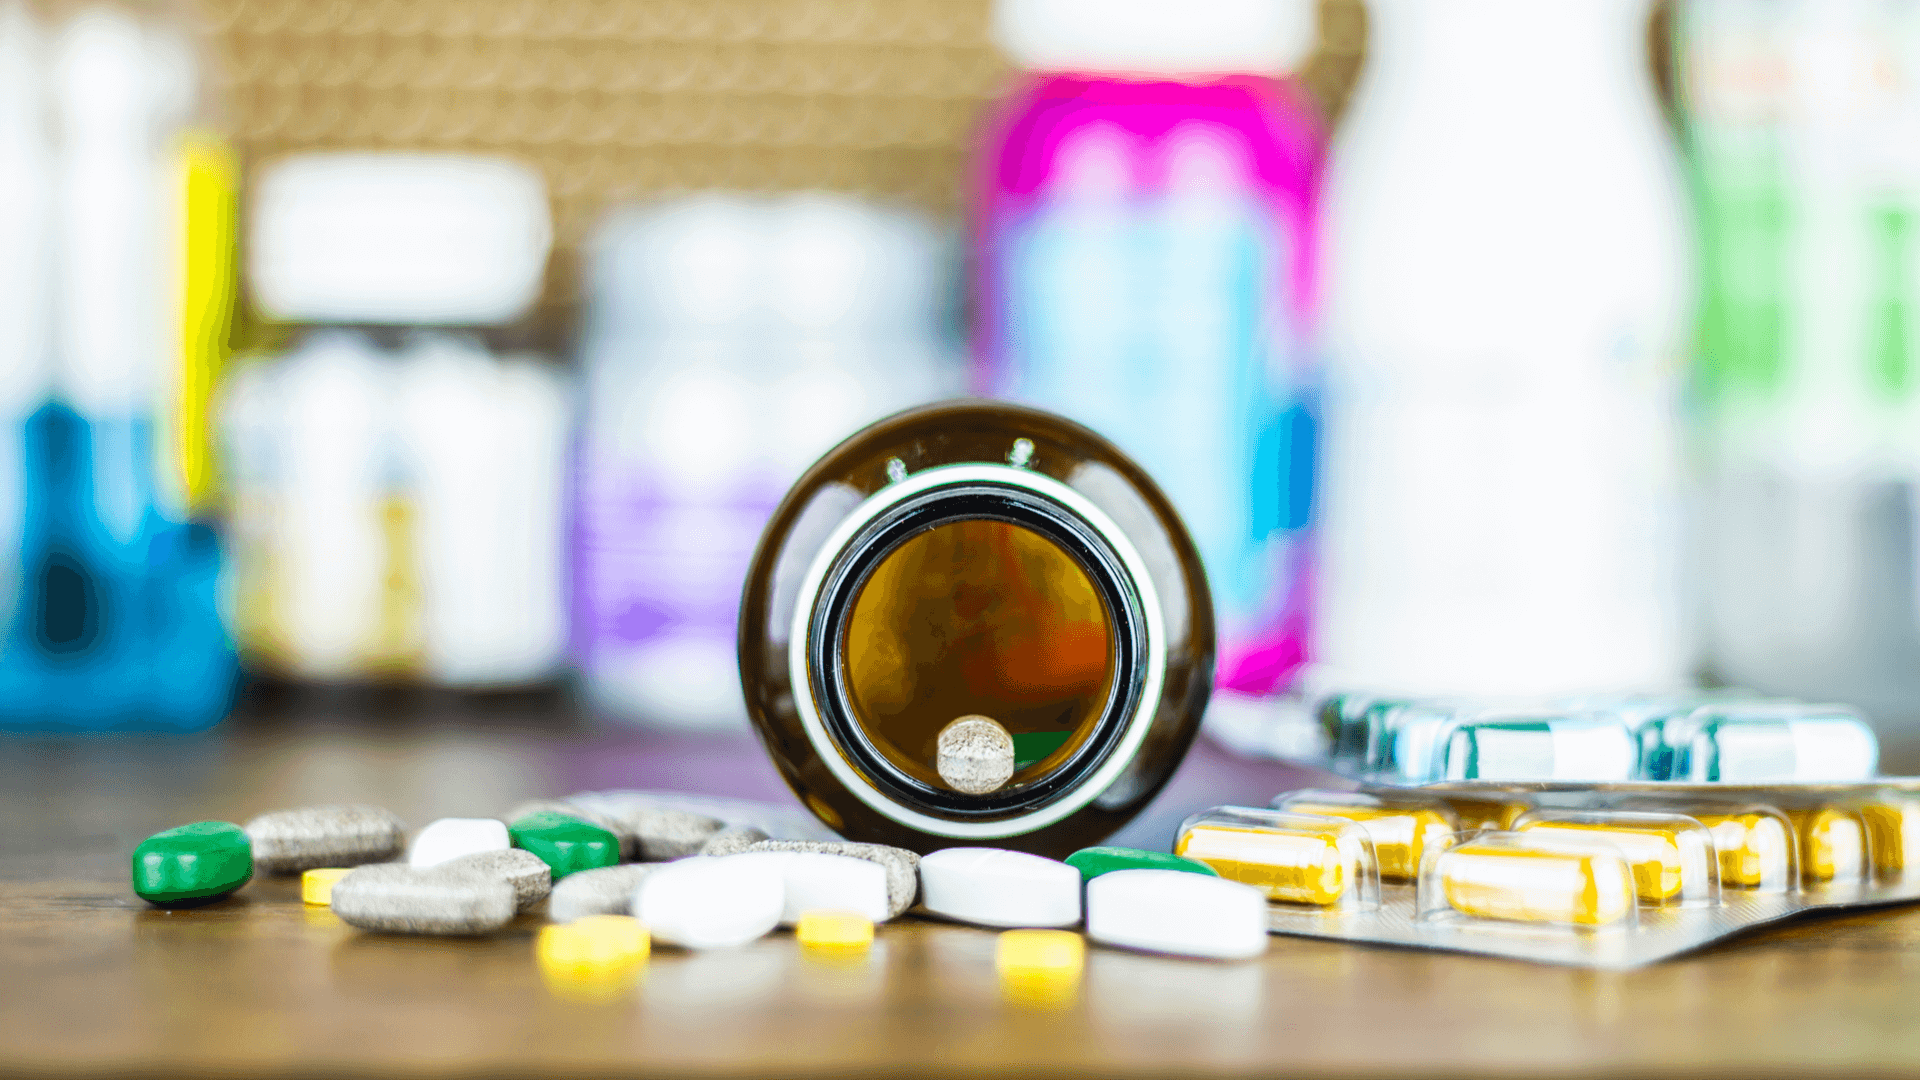 Prescription drug lawsuits are long and complicated cases. Getting help from an experienced personal injury lawyer will help you prepare for the complexities of your case.